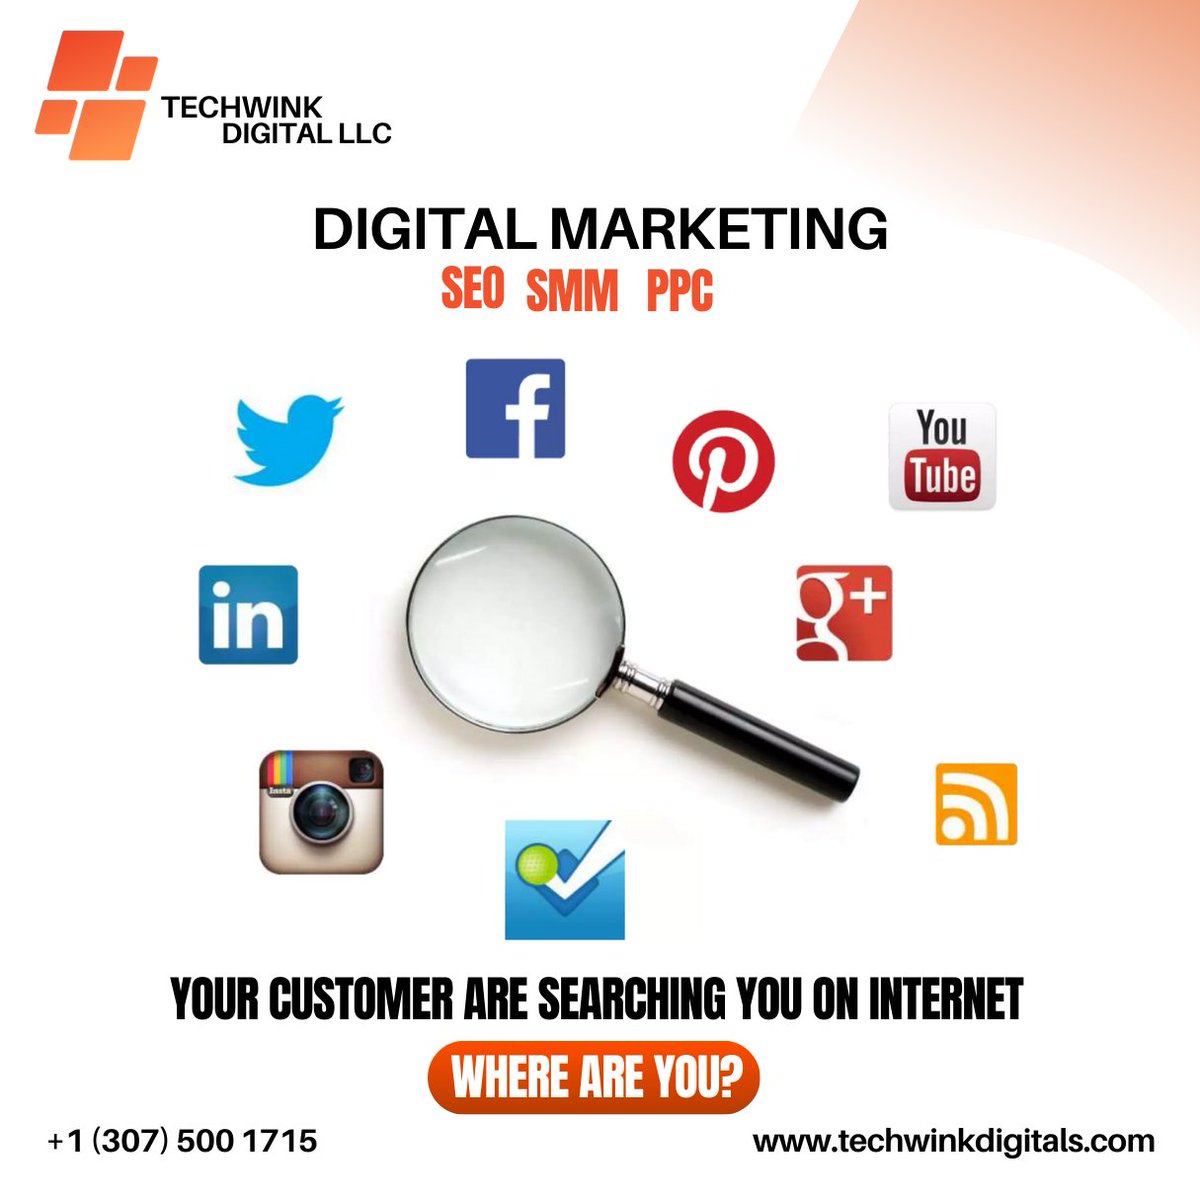 Supercharge your online presence with our expert Digital Marketing trio: Social Media, SEO, and PPC.

Visit Now: techwinkdigitals.com

#digitalservices #websolution #developmentproject #digitalmarketing #techwinkdigital #digitalExcellence #seo #ppc #smm